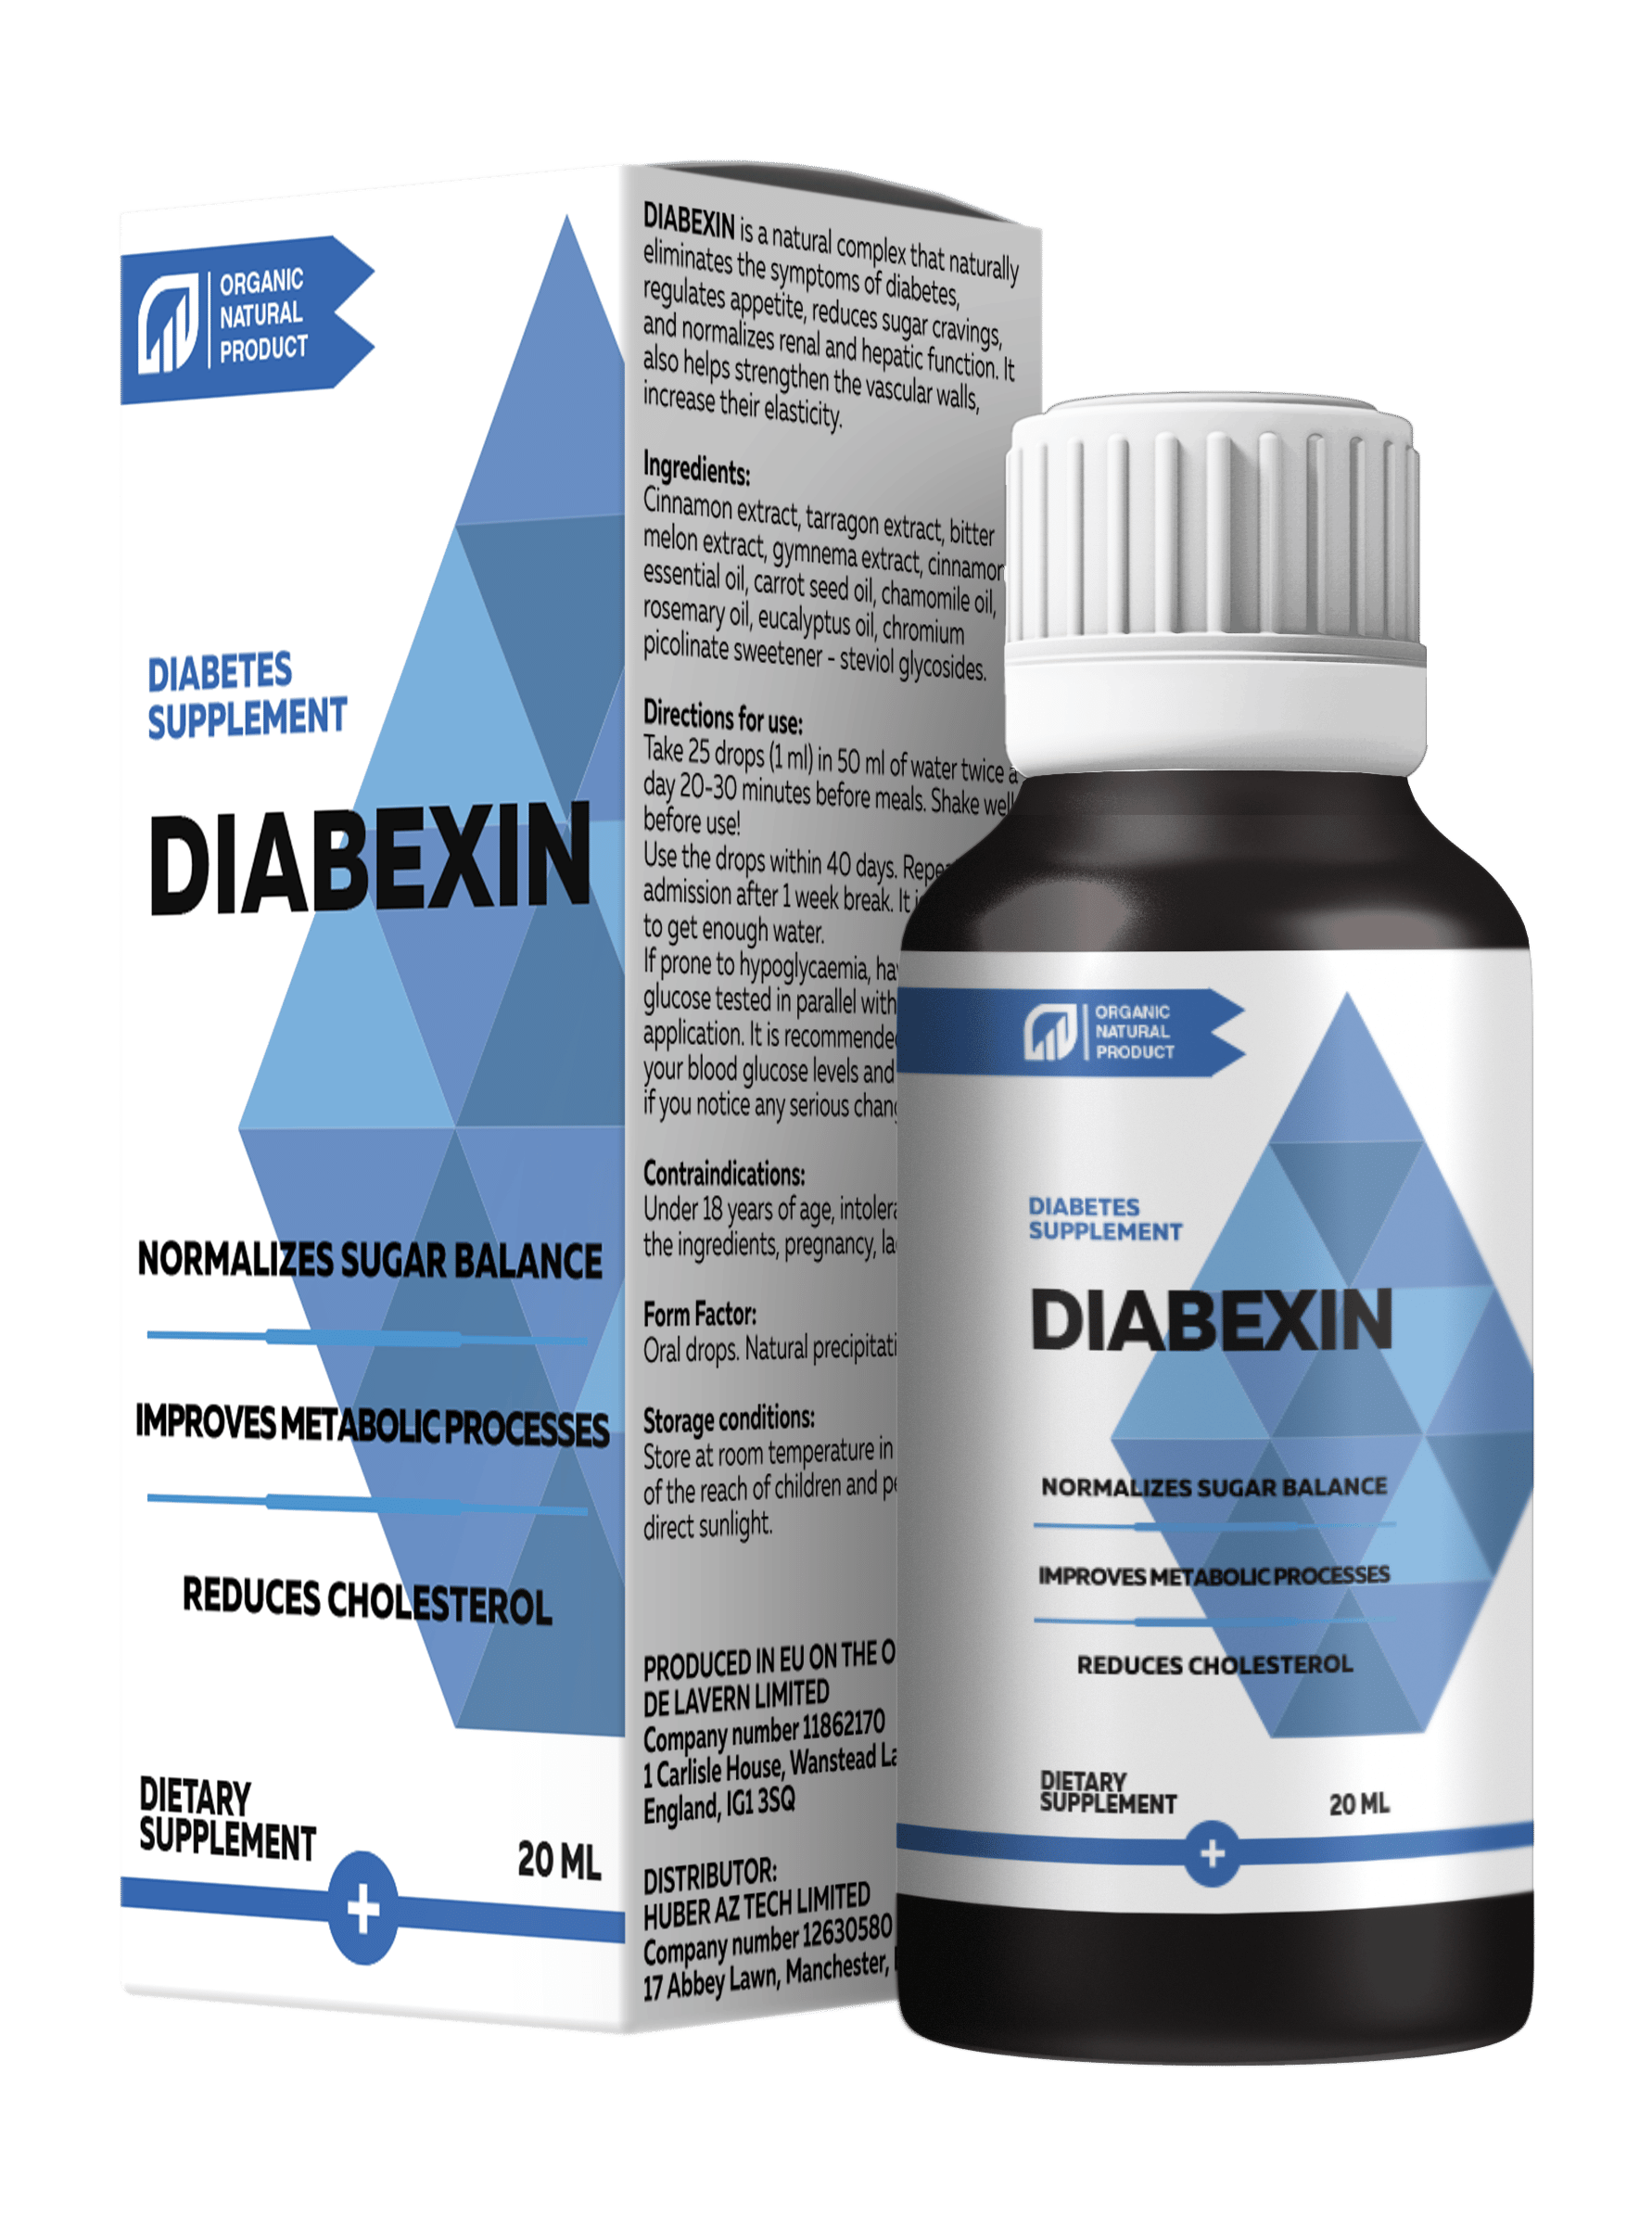 Diabexin Product Overview. What Is It?